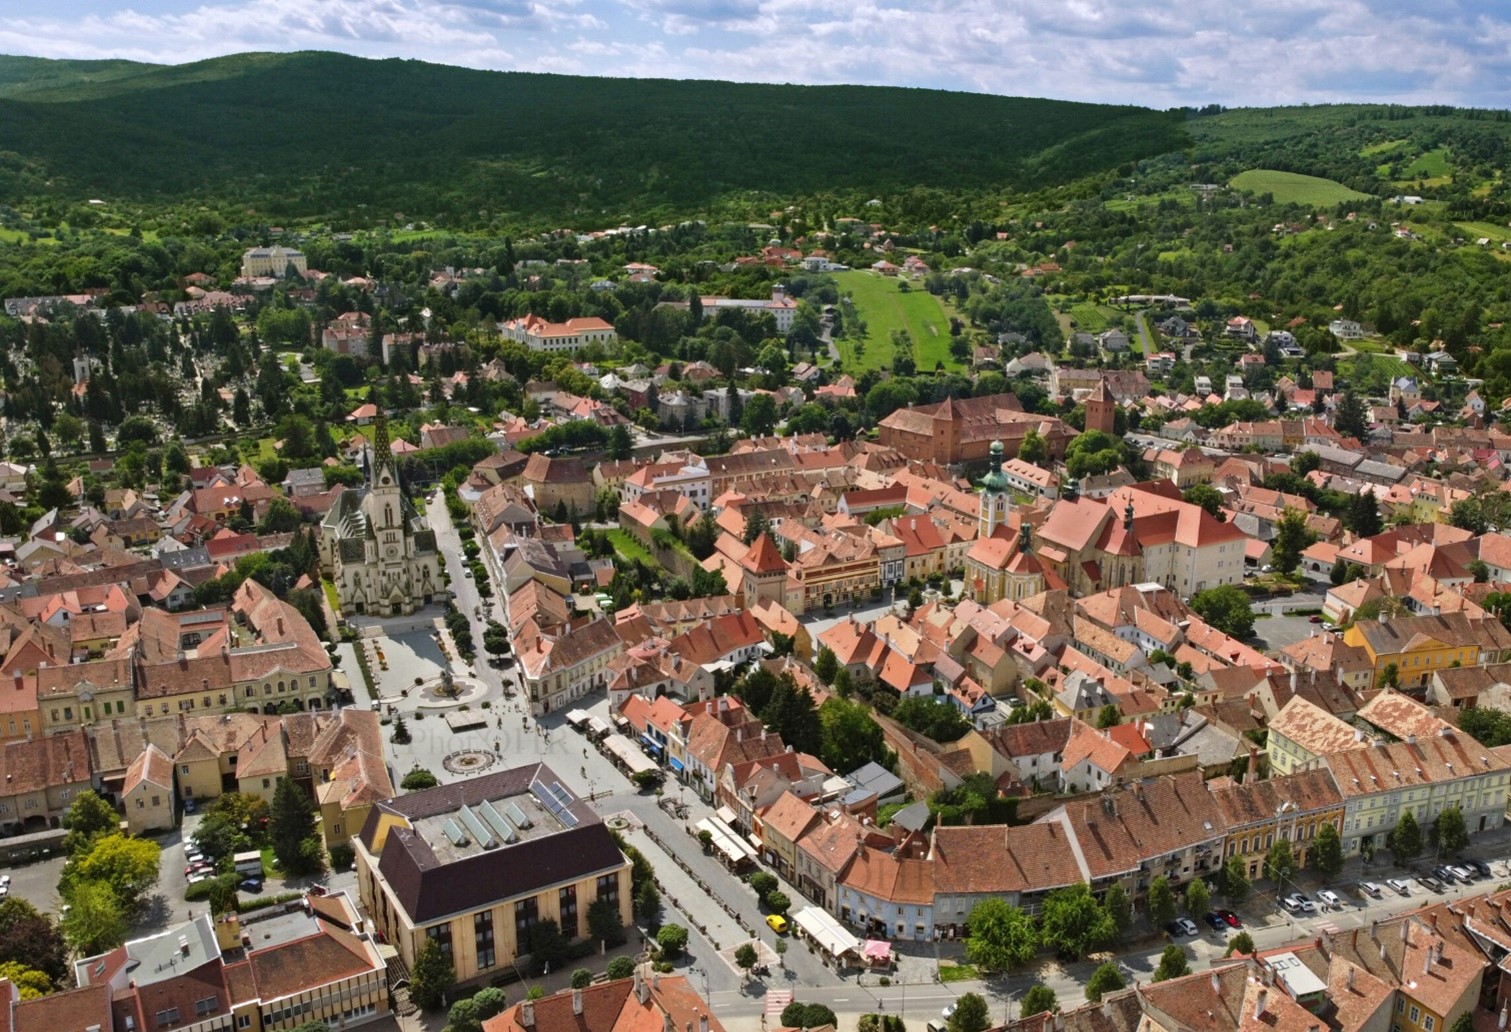 KŐSZEG AND ITS SURROUNDINGS - Regional Action Plan